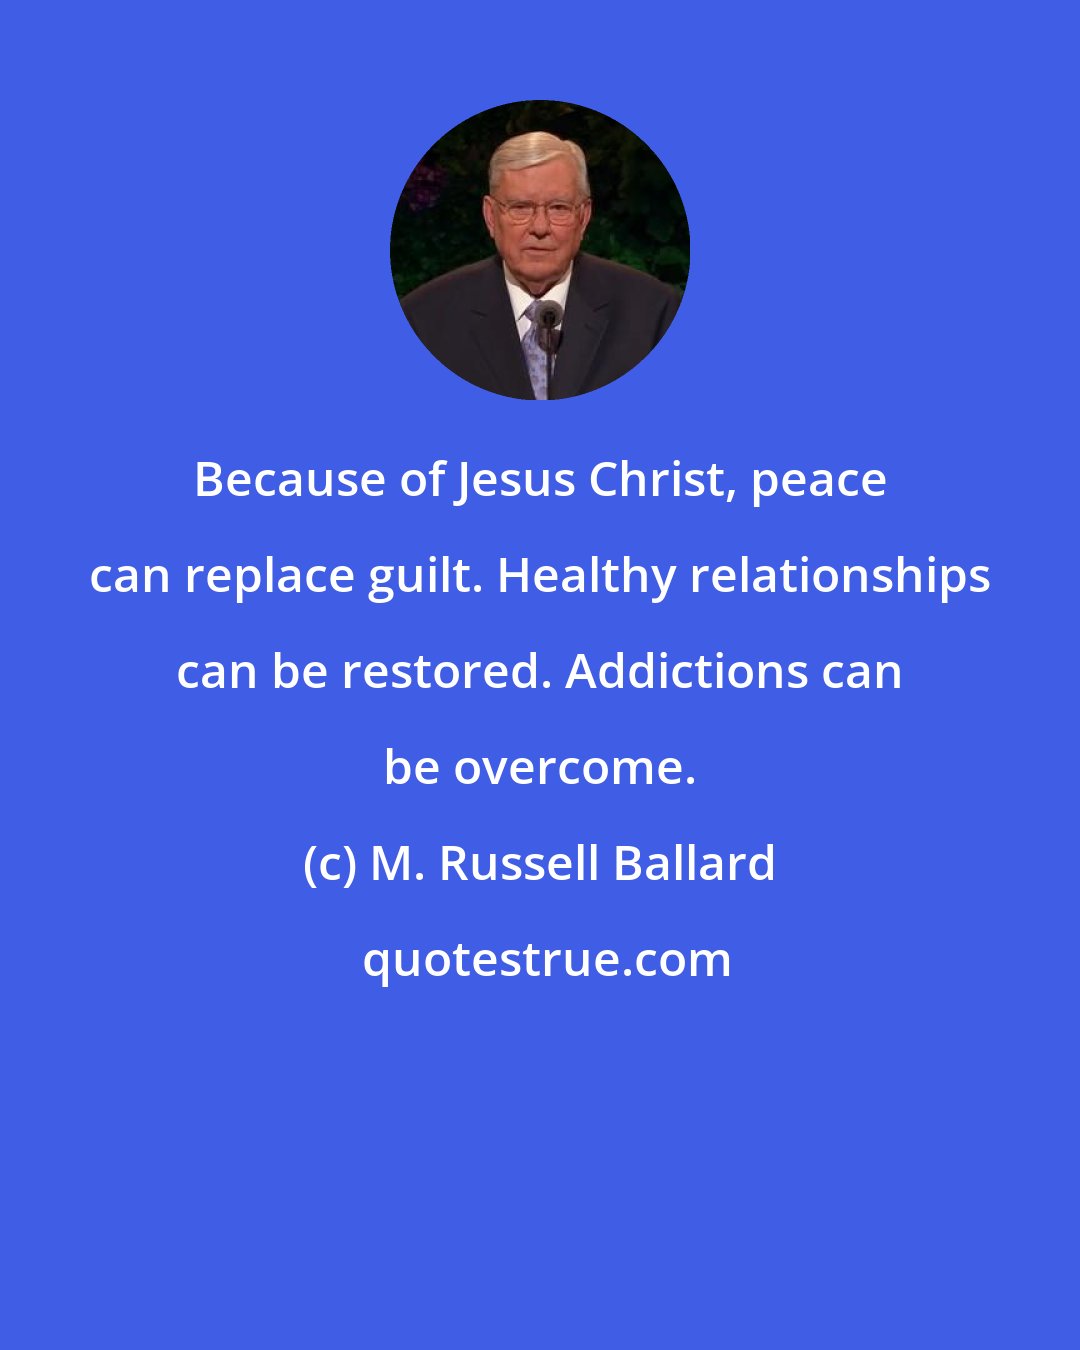 M. Russell Ballard: Because of Jesus Christ, peace can replace guilt. Healthy relationships can be restored. Addictions can be overcome.